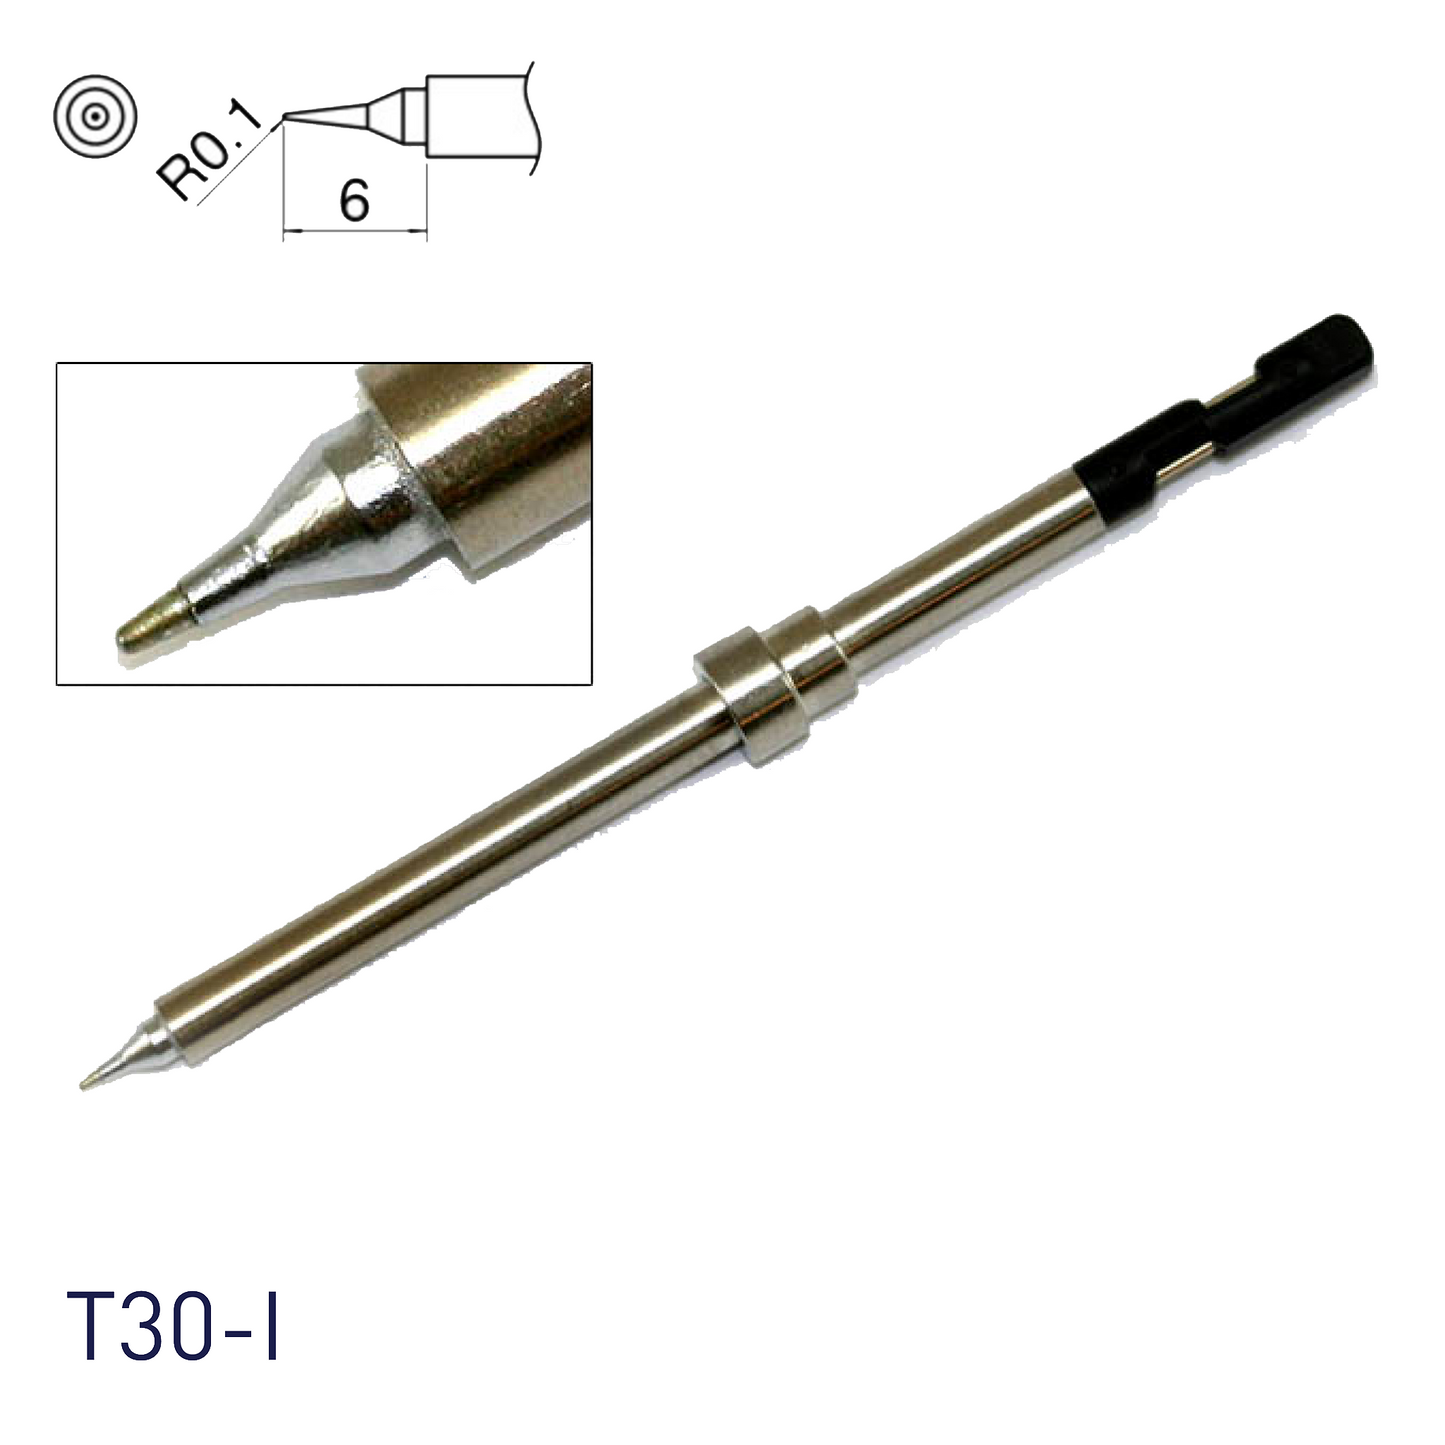 Hakko FM2032 micro soldering iron replacement tips T30-I with N2 soldering option available narrow ballpoint shape